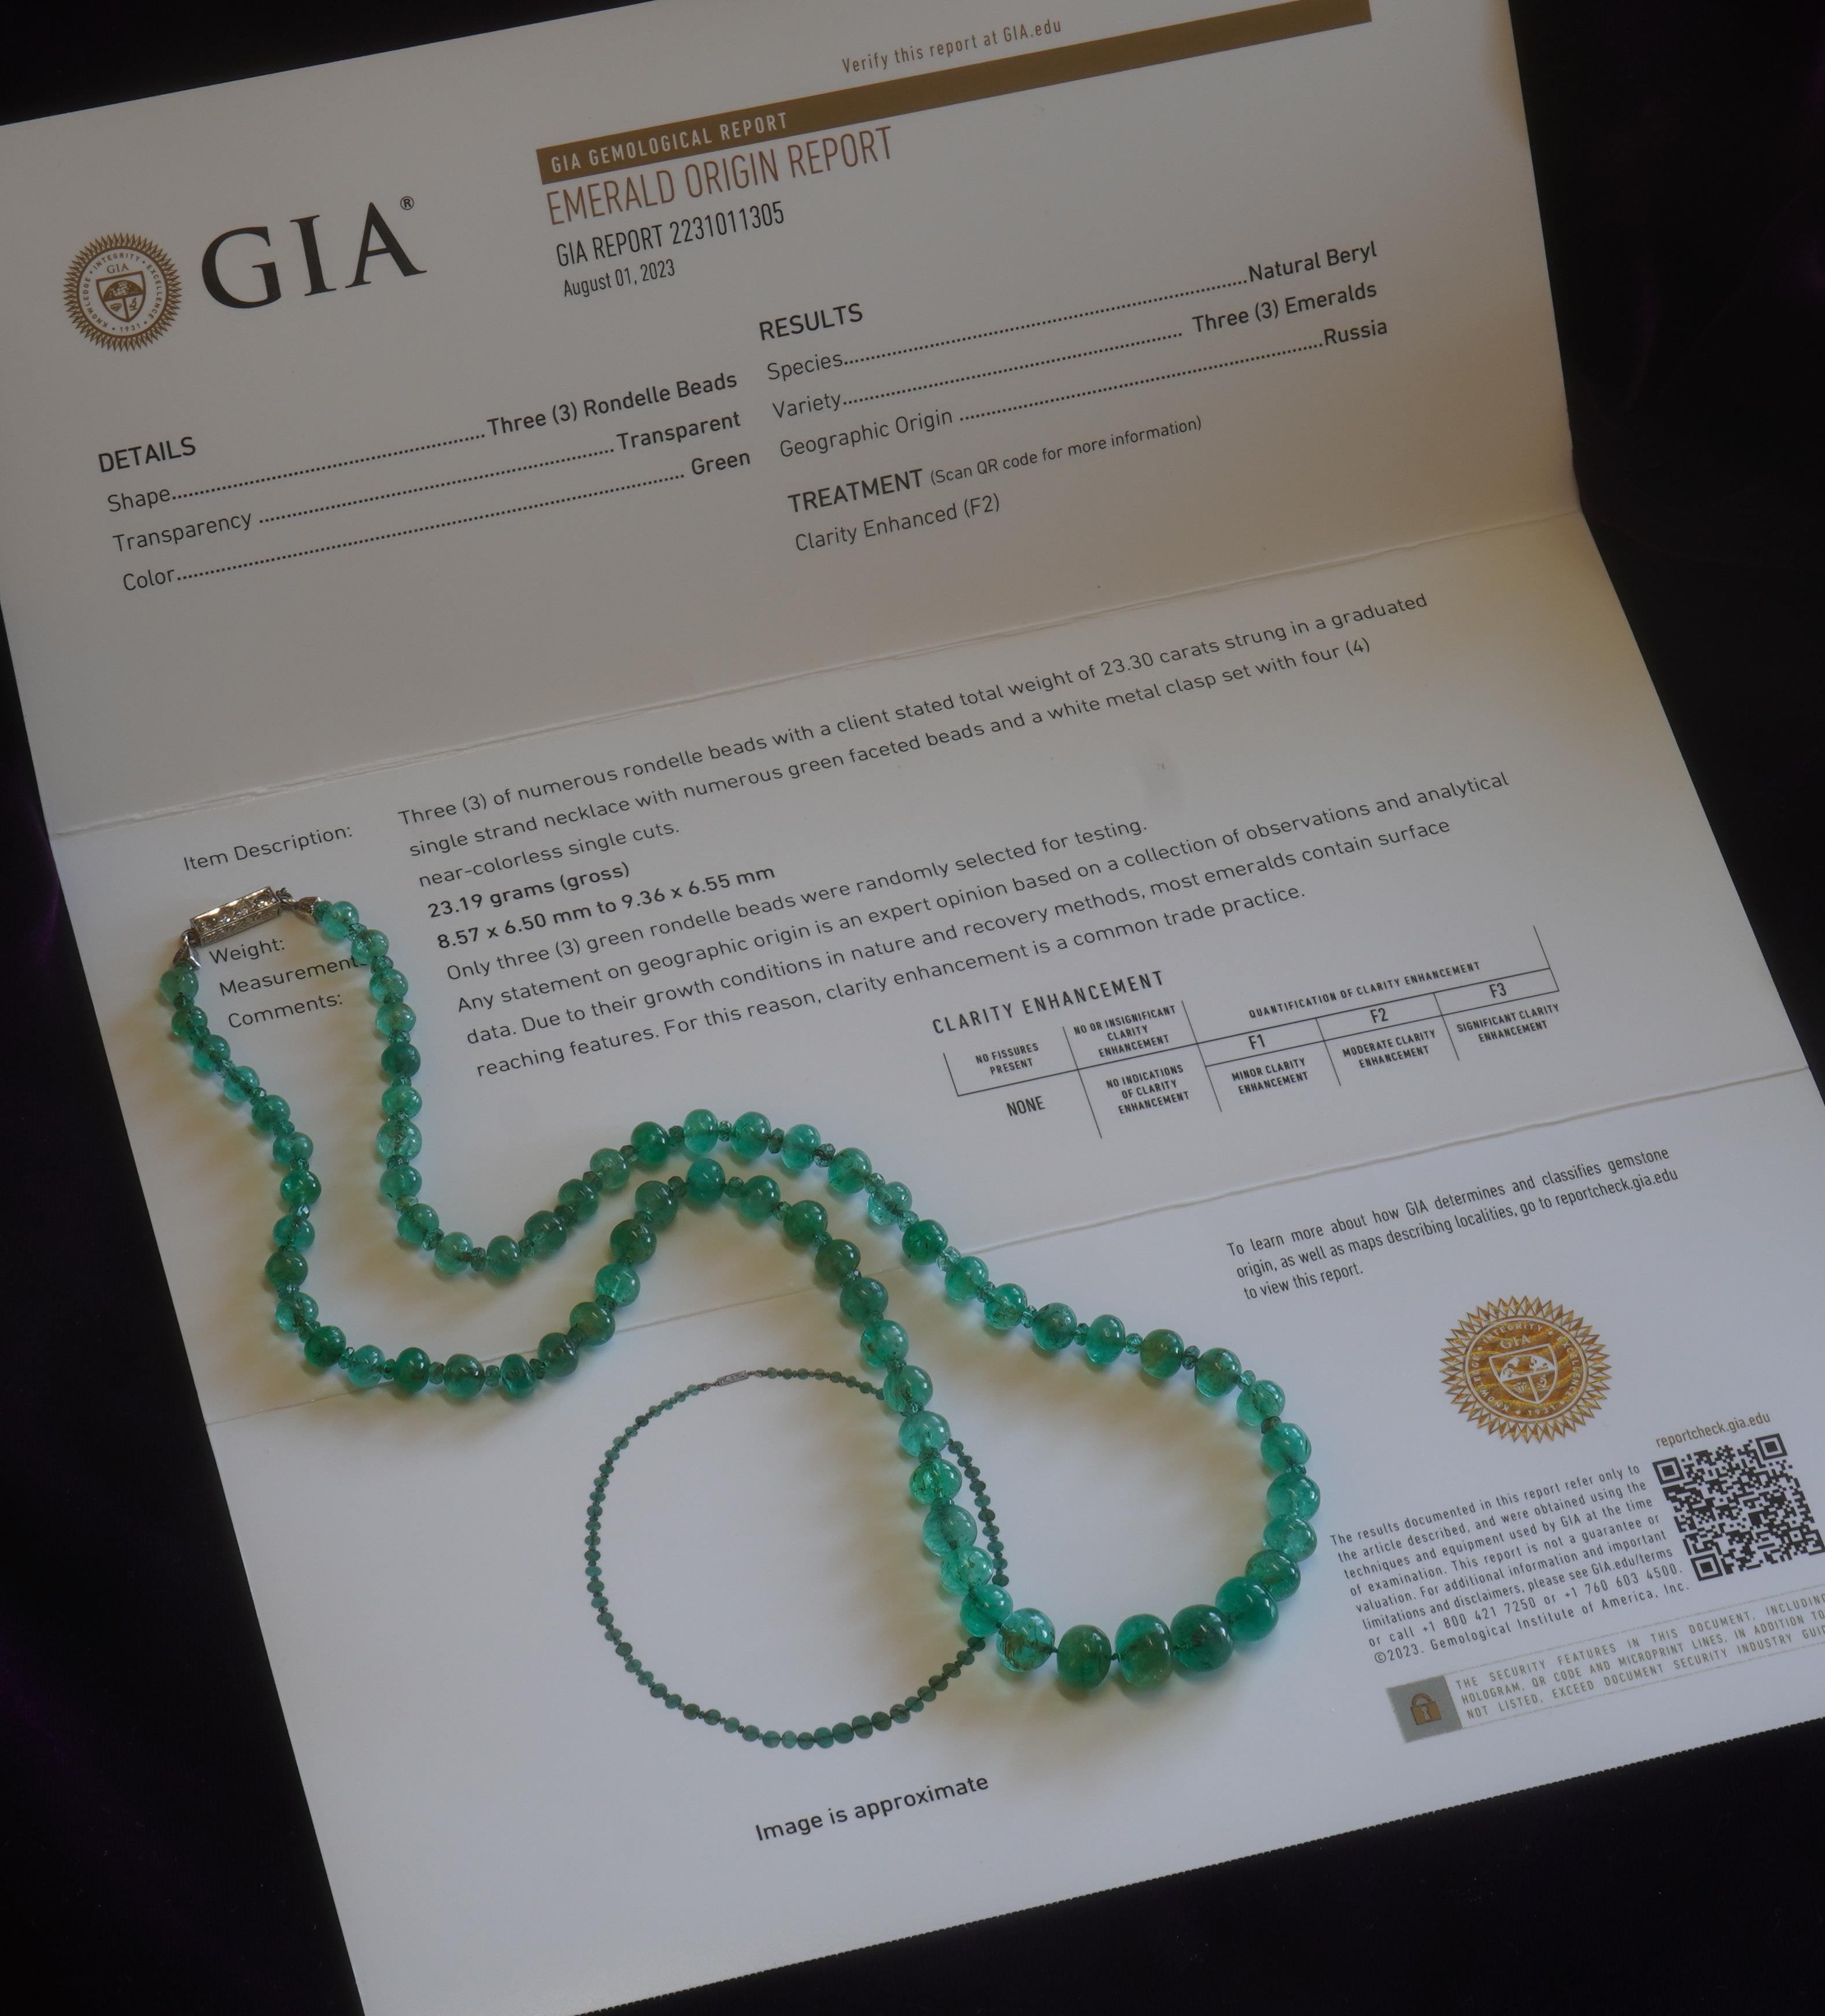 Old South Jewels proudly presents.... LUXURY.   GIA Certified RARE PLATINUM 105.65 CARATS EMERALD DIAMOND NECKLACE AND BOX!   Vintage Natural 1800s Russian Emeralds....Stunning!  

GORGEOUS 19 INCHES LONG EMERALD NECKLACE.  Very Classy...This Will